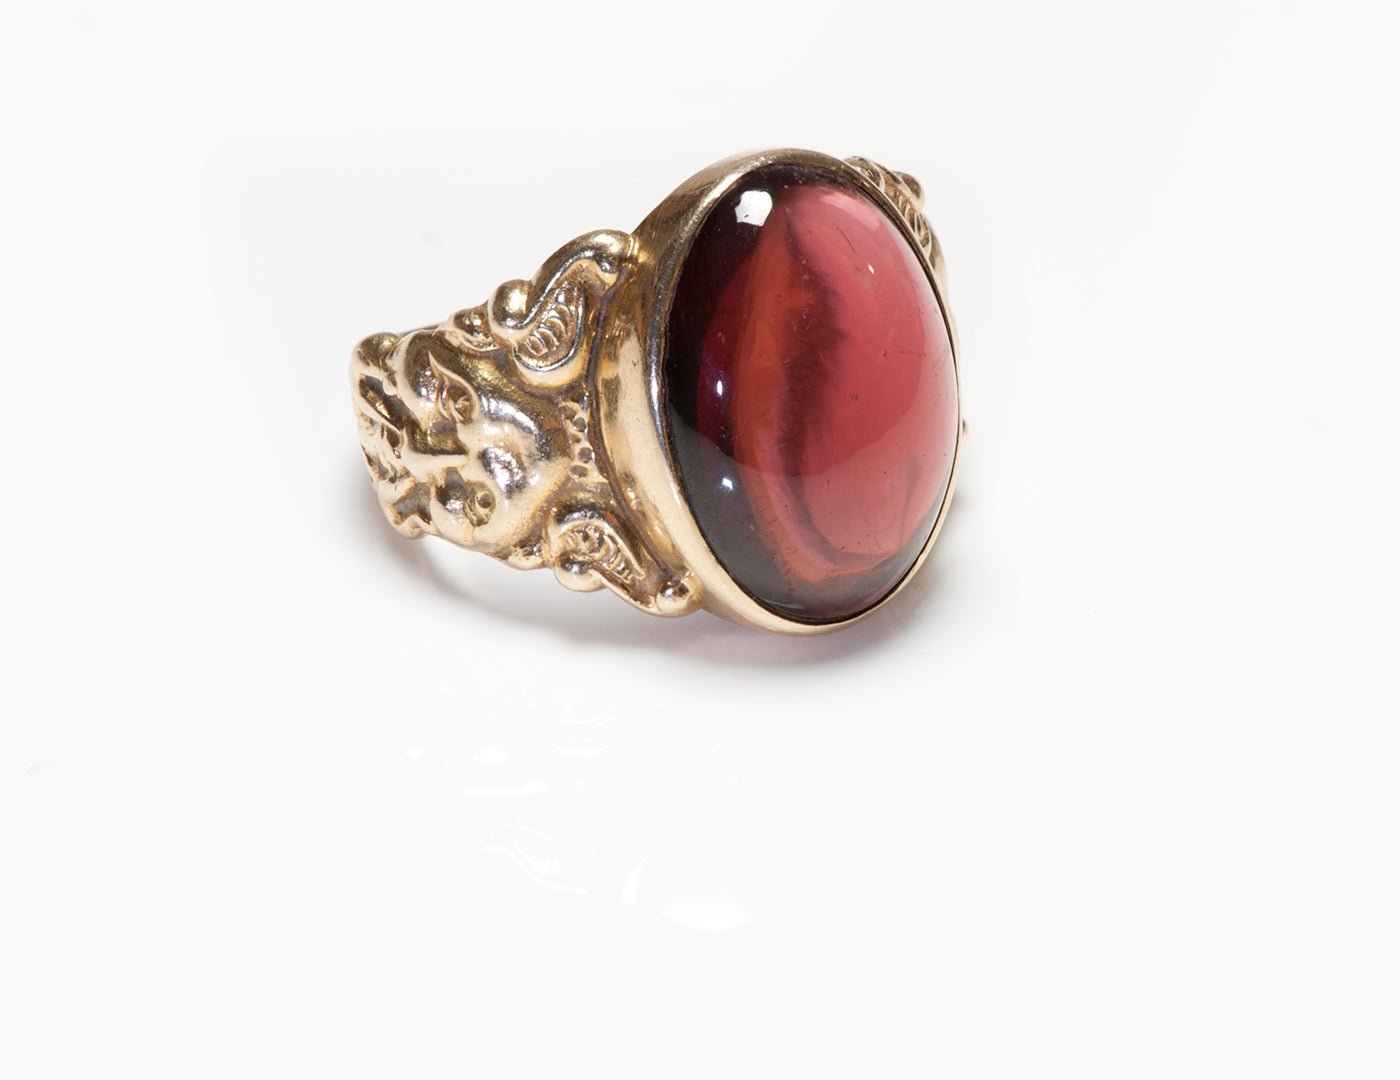 Antique Turn of the Century Gold and Cabochon Garnet Men's Ring